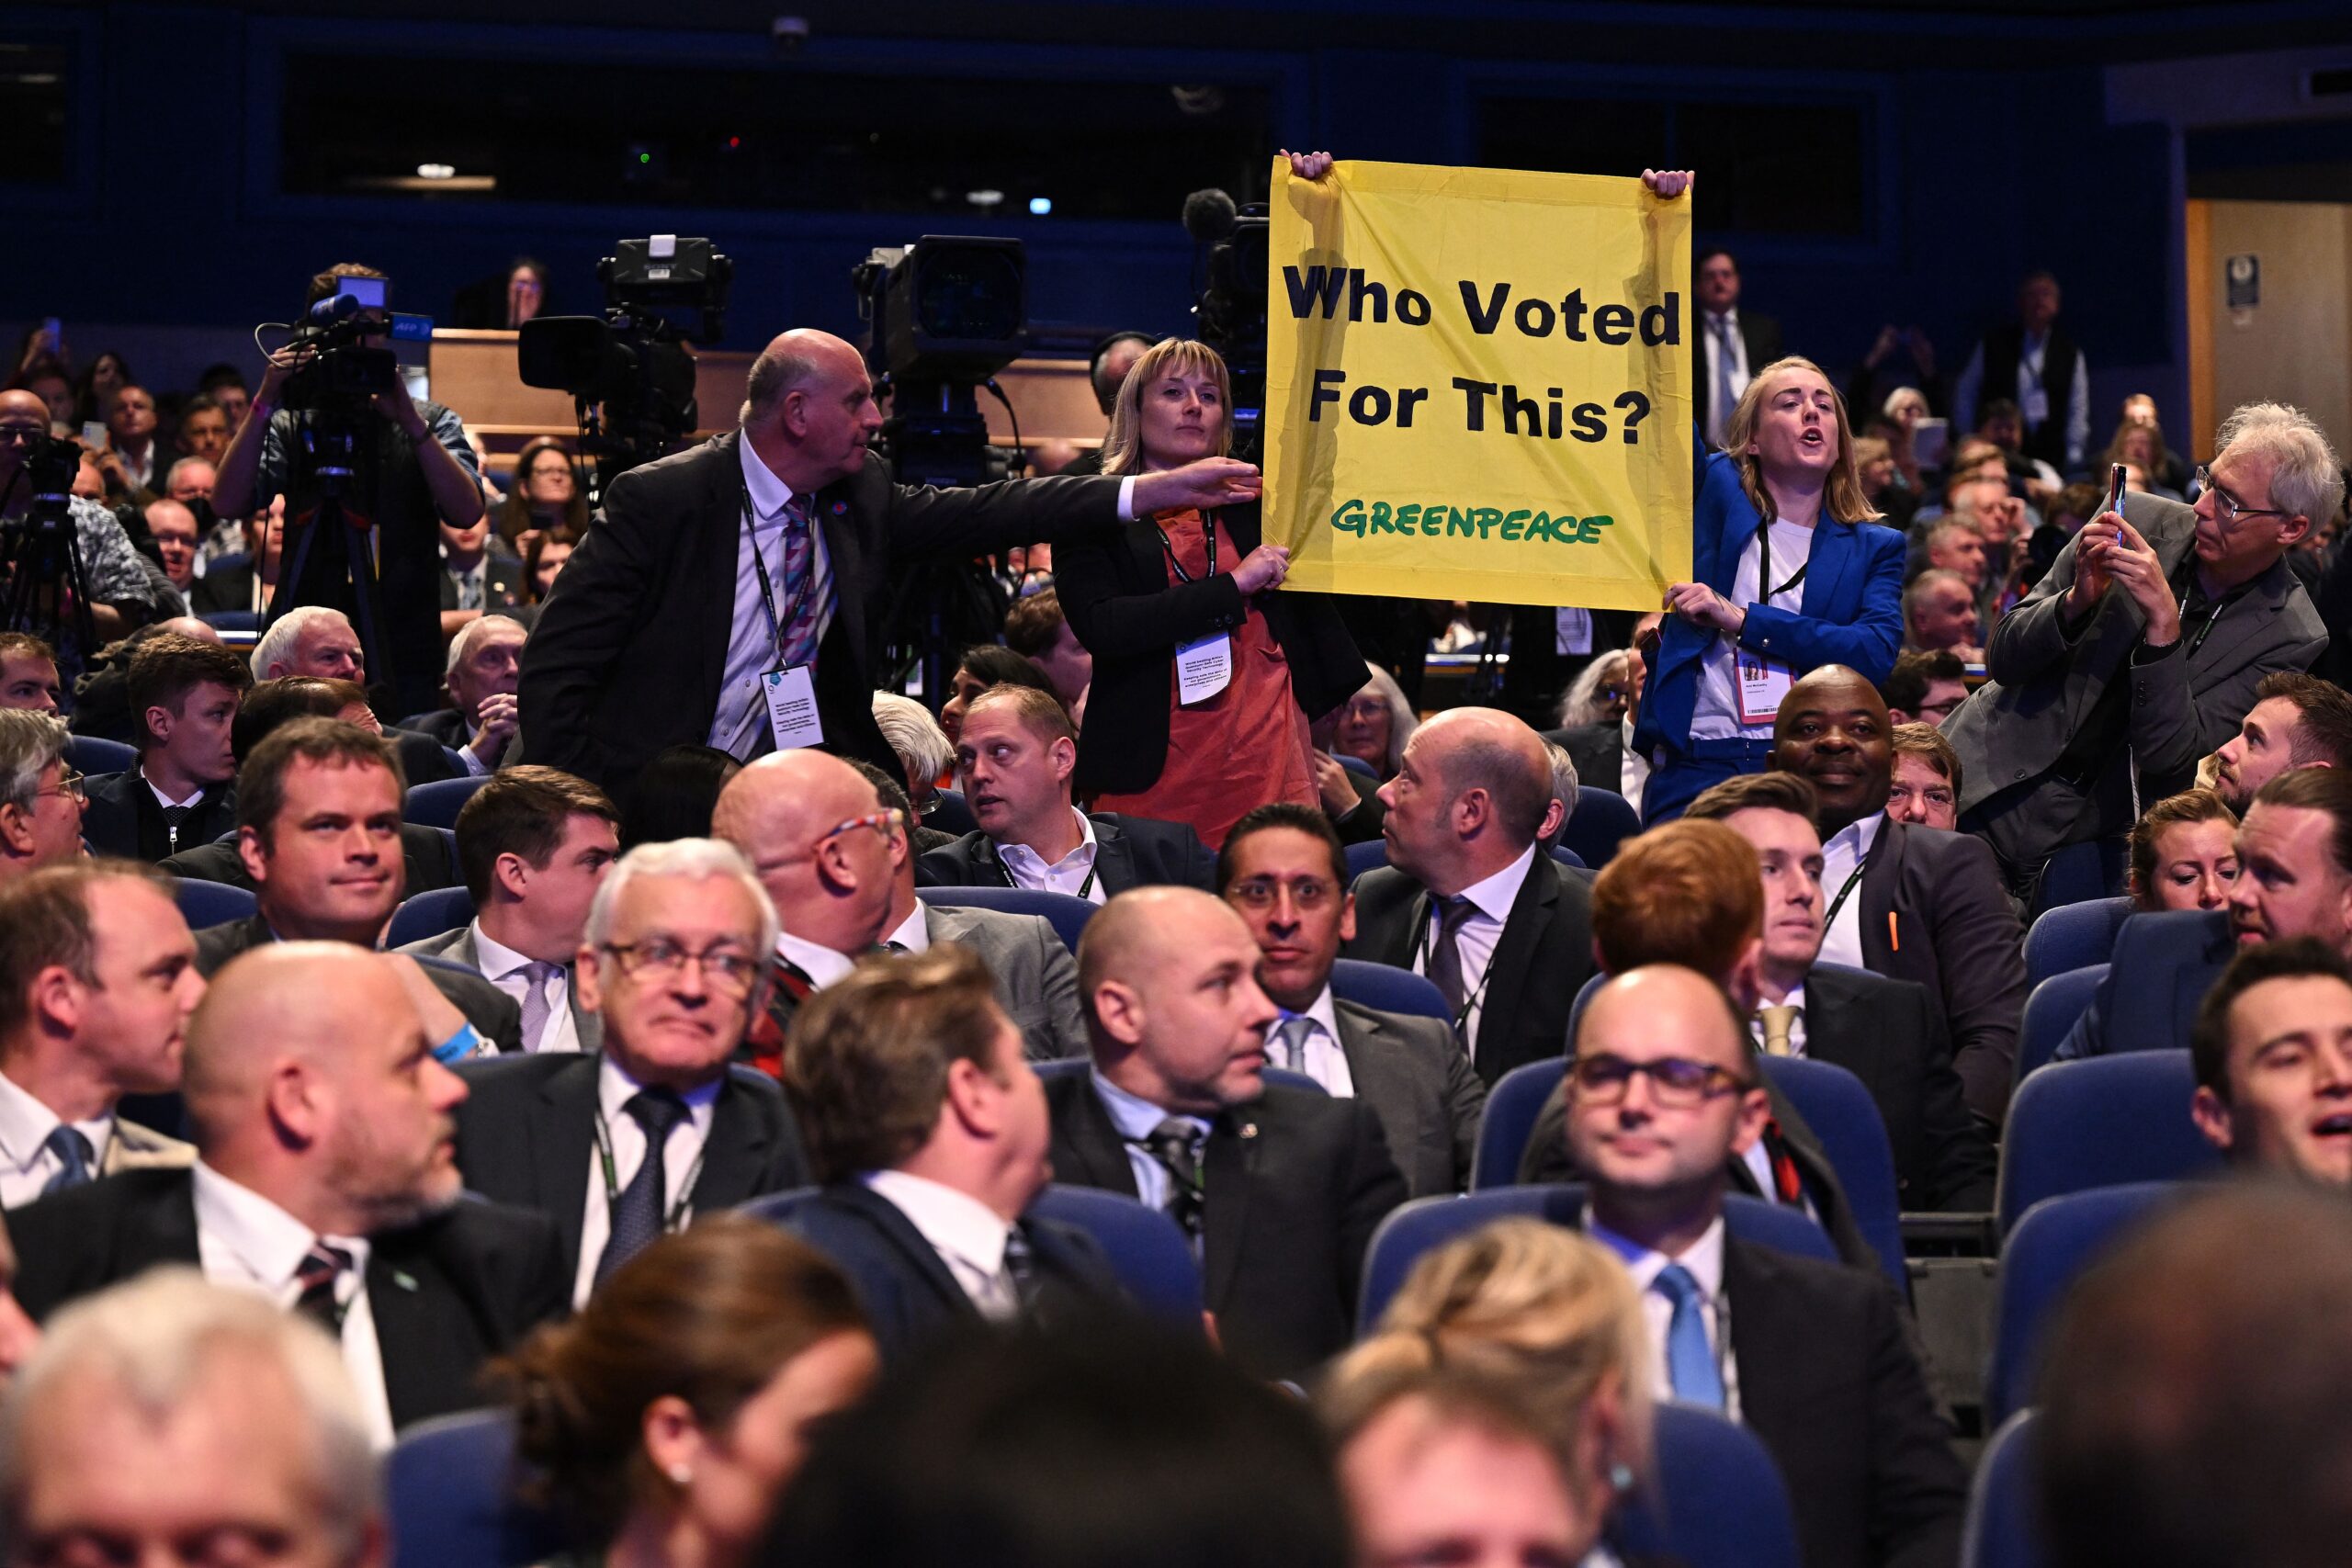 A crowded theatre full of predominantly white men in suits. Two women standing wearing lanyards are holding a yellow Greenpeace banner reading 'Who Voted For This' as a man in a lanyard reaches over to grab it, and another man takes a photo from the side. In the background are large TV cameras